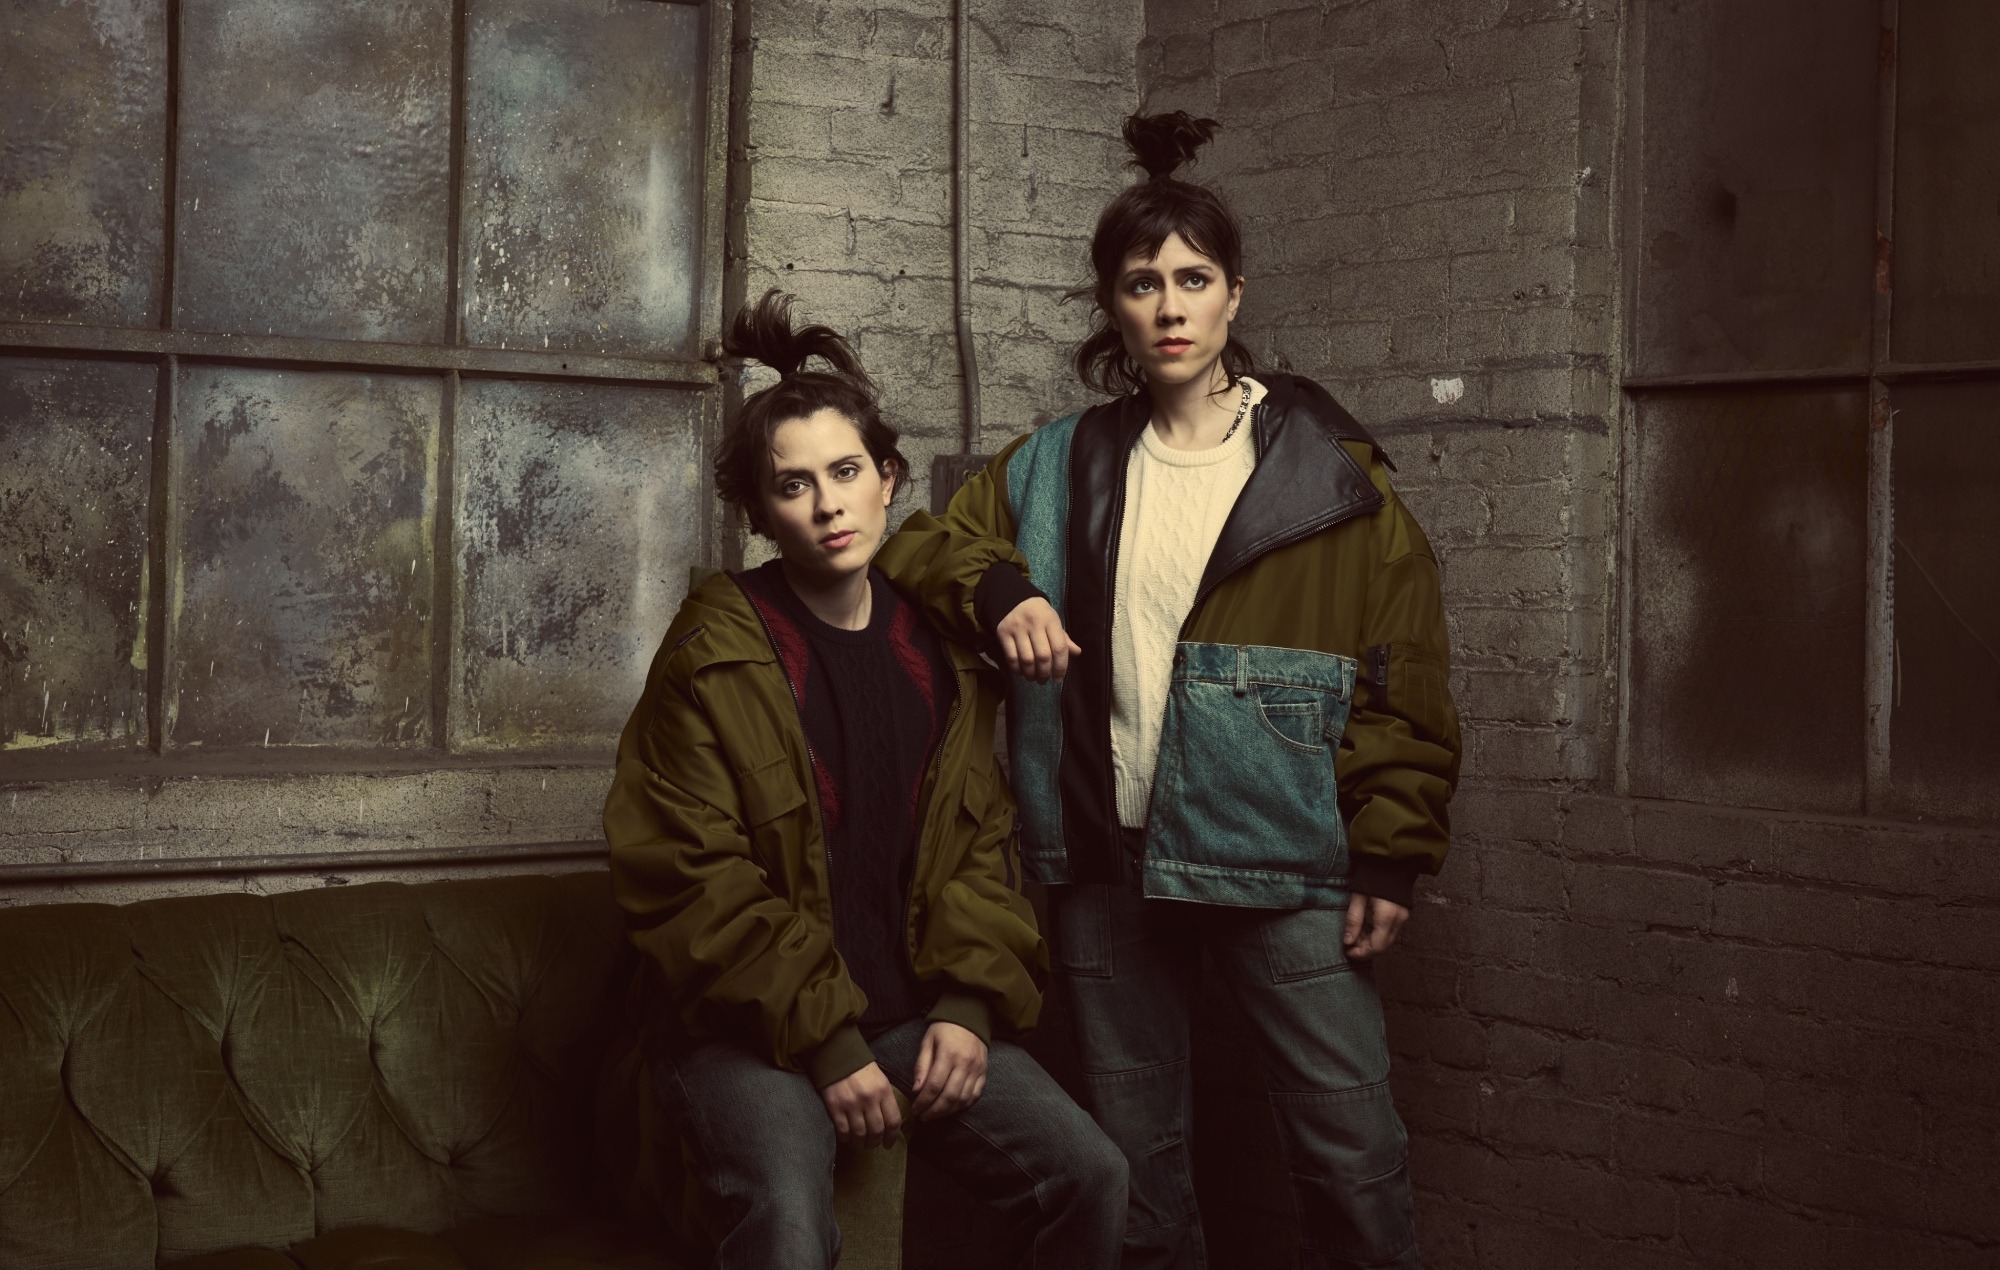 Tegan and Sara: “How have we lasted 25 years? Strategy”